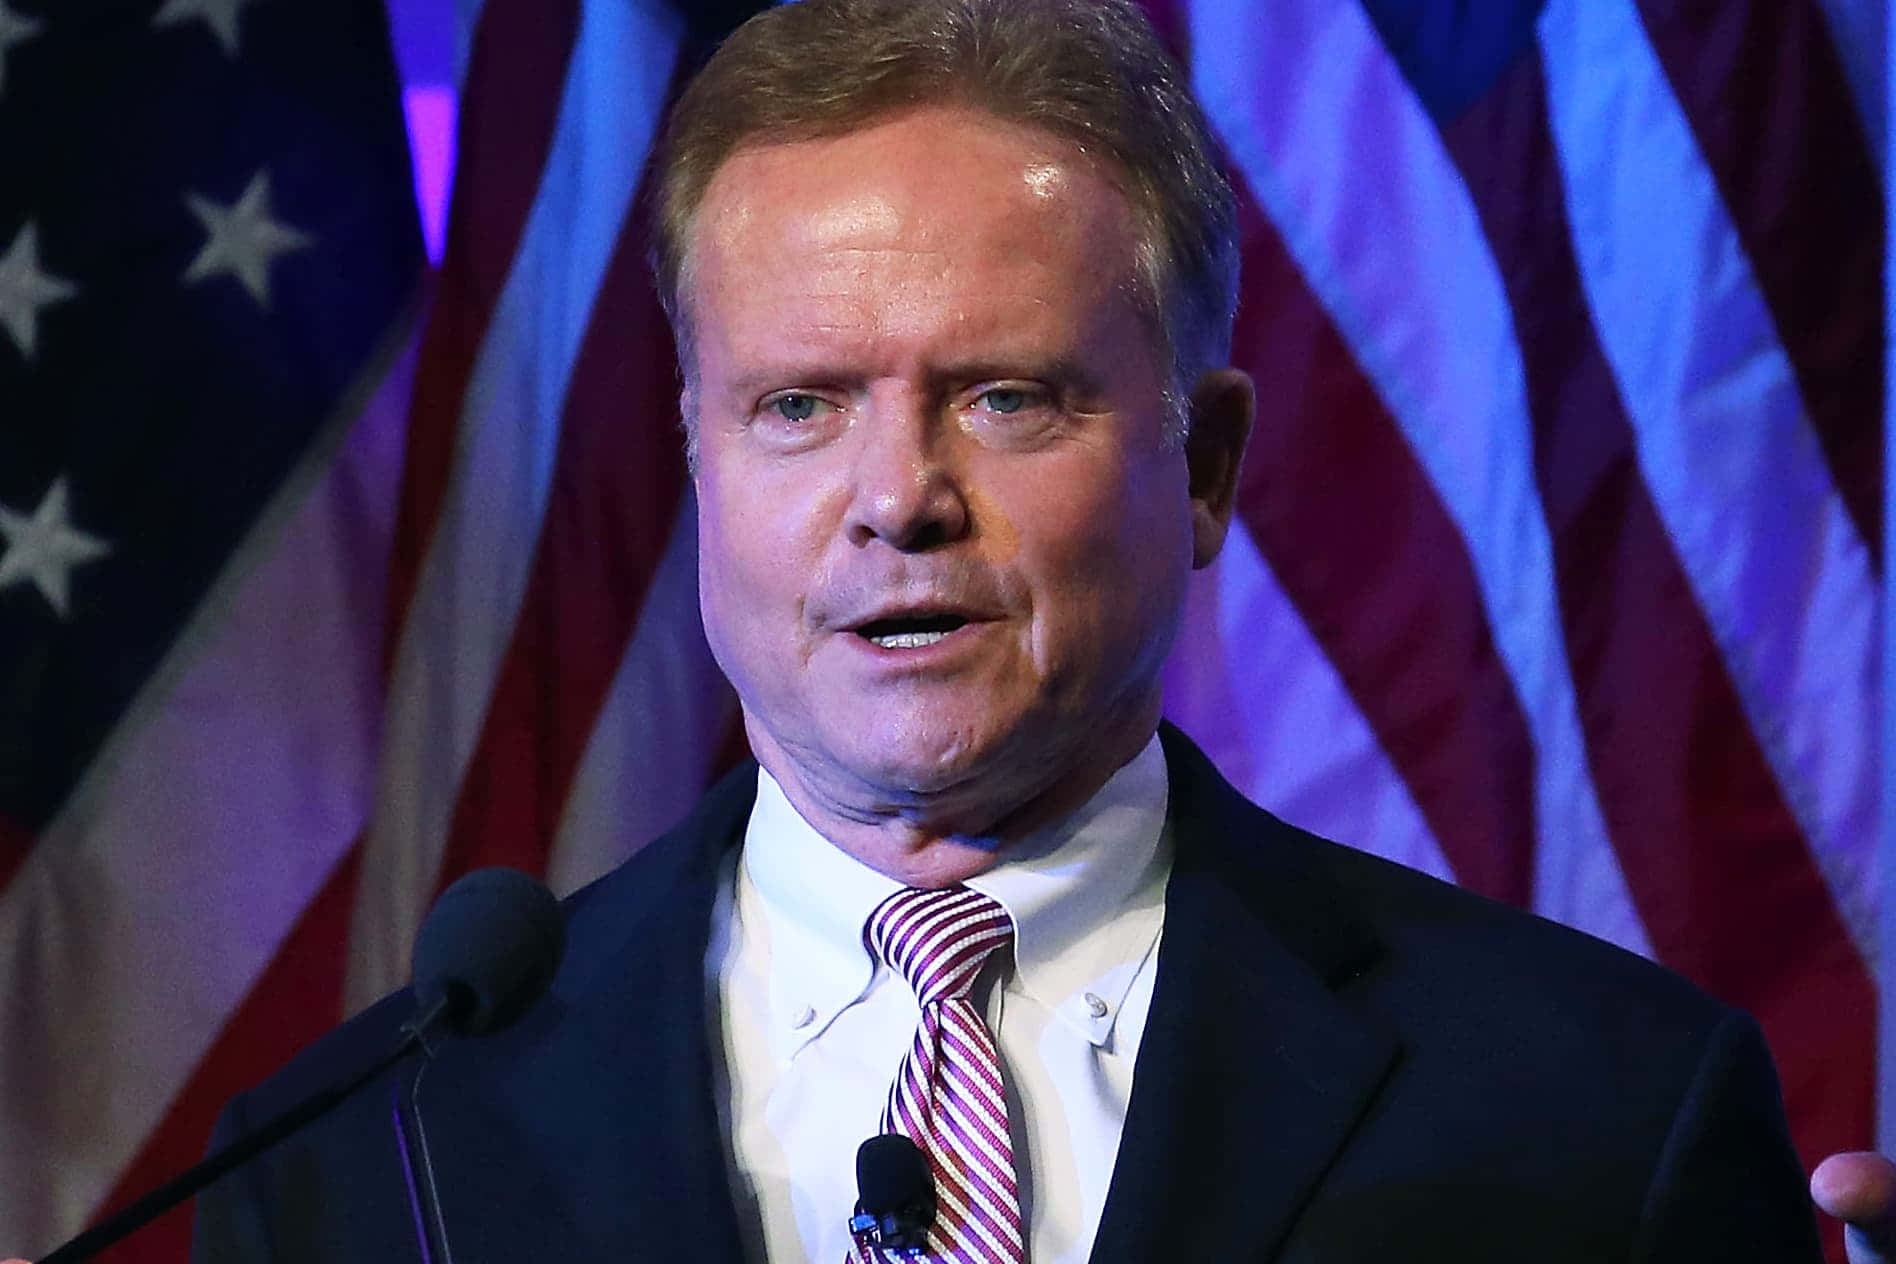 Jimwebb Solemn Could Be Translated To Spanish As 